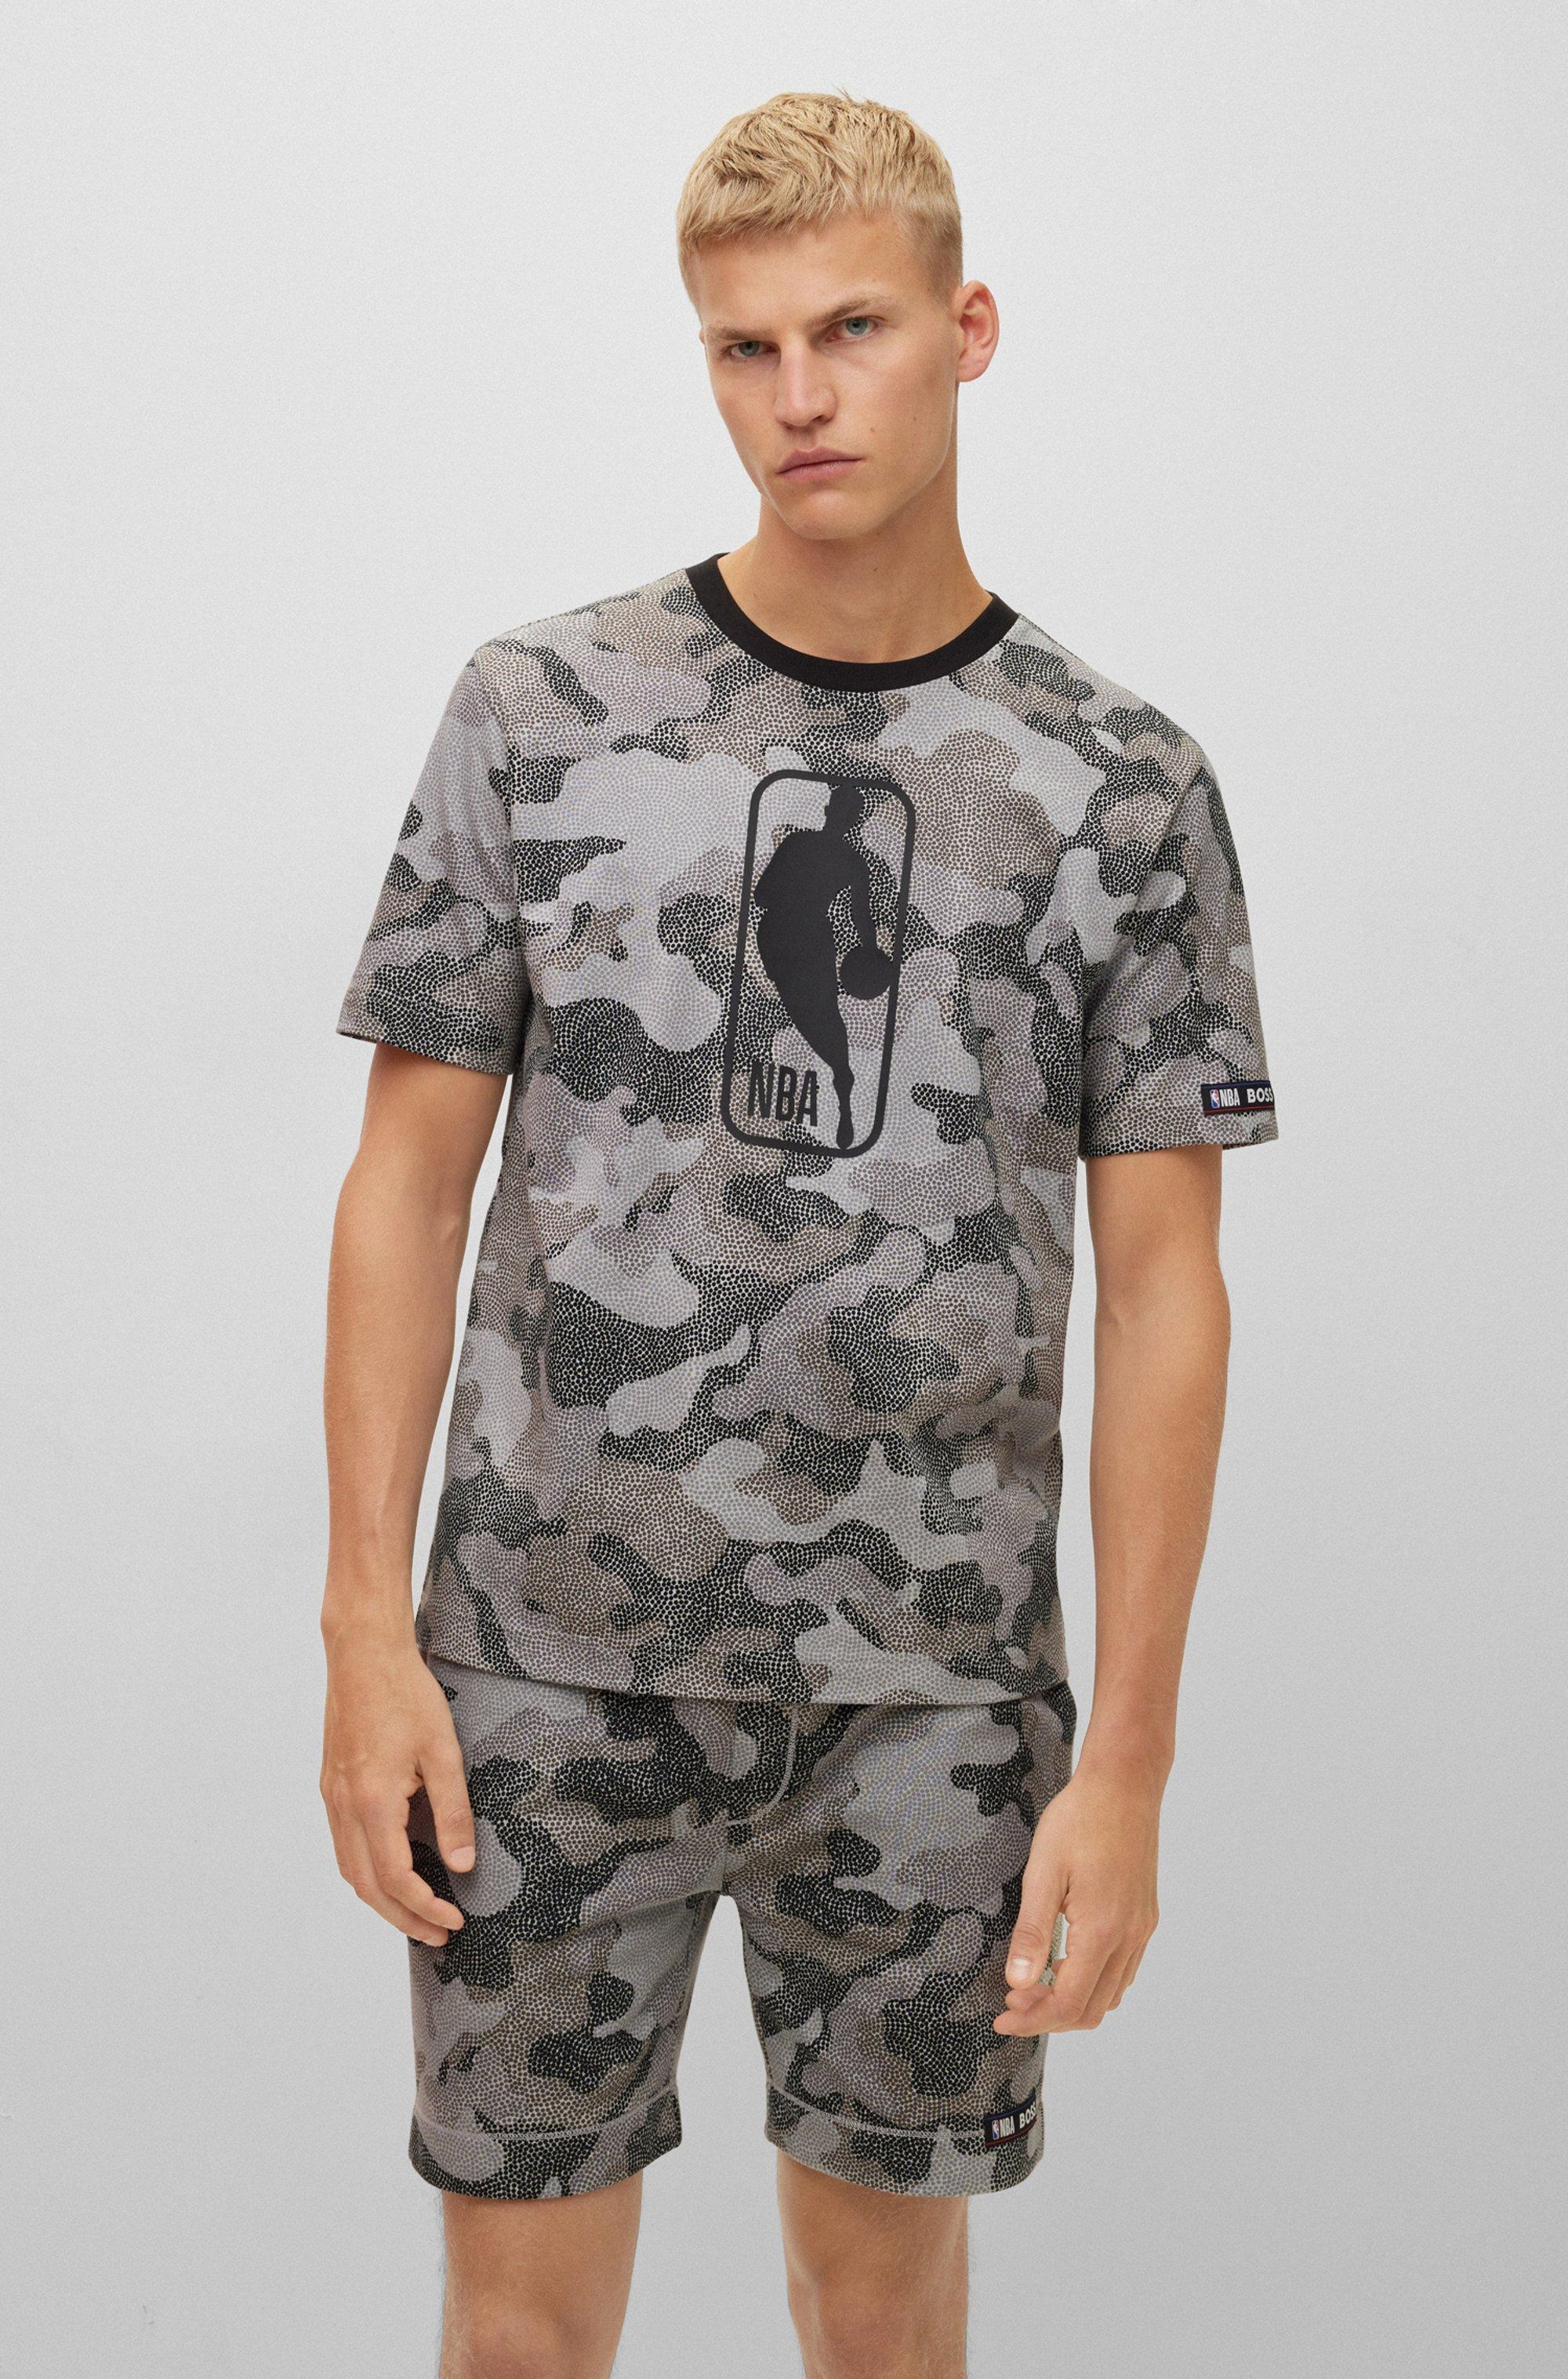 BOSS by HUGO BOSS Boss & Nba Cotton-jersey T-shirt With Camouflage Pattern  in Gray for Men | Lyst